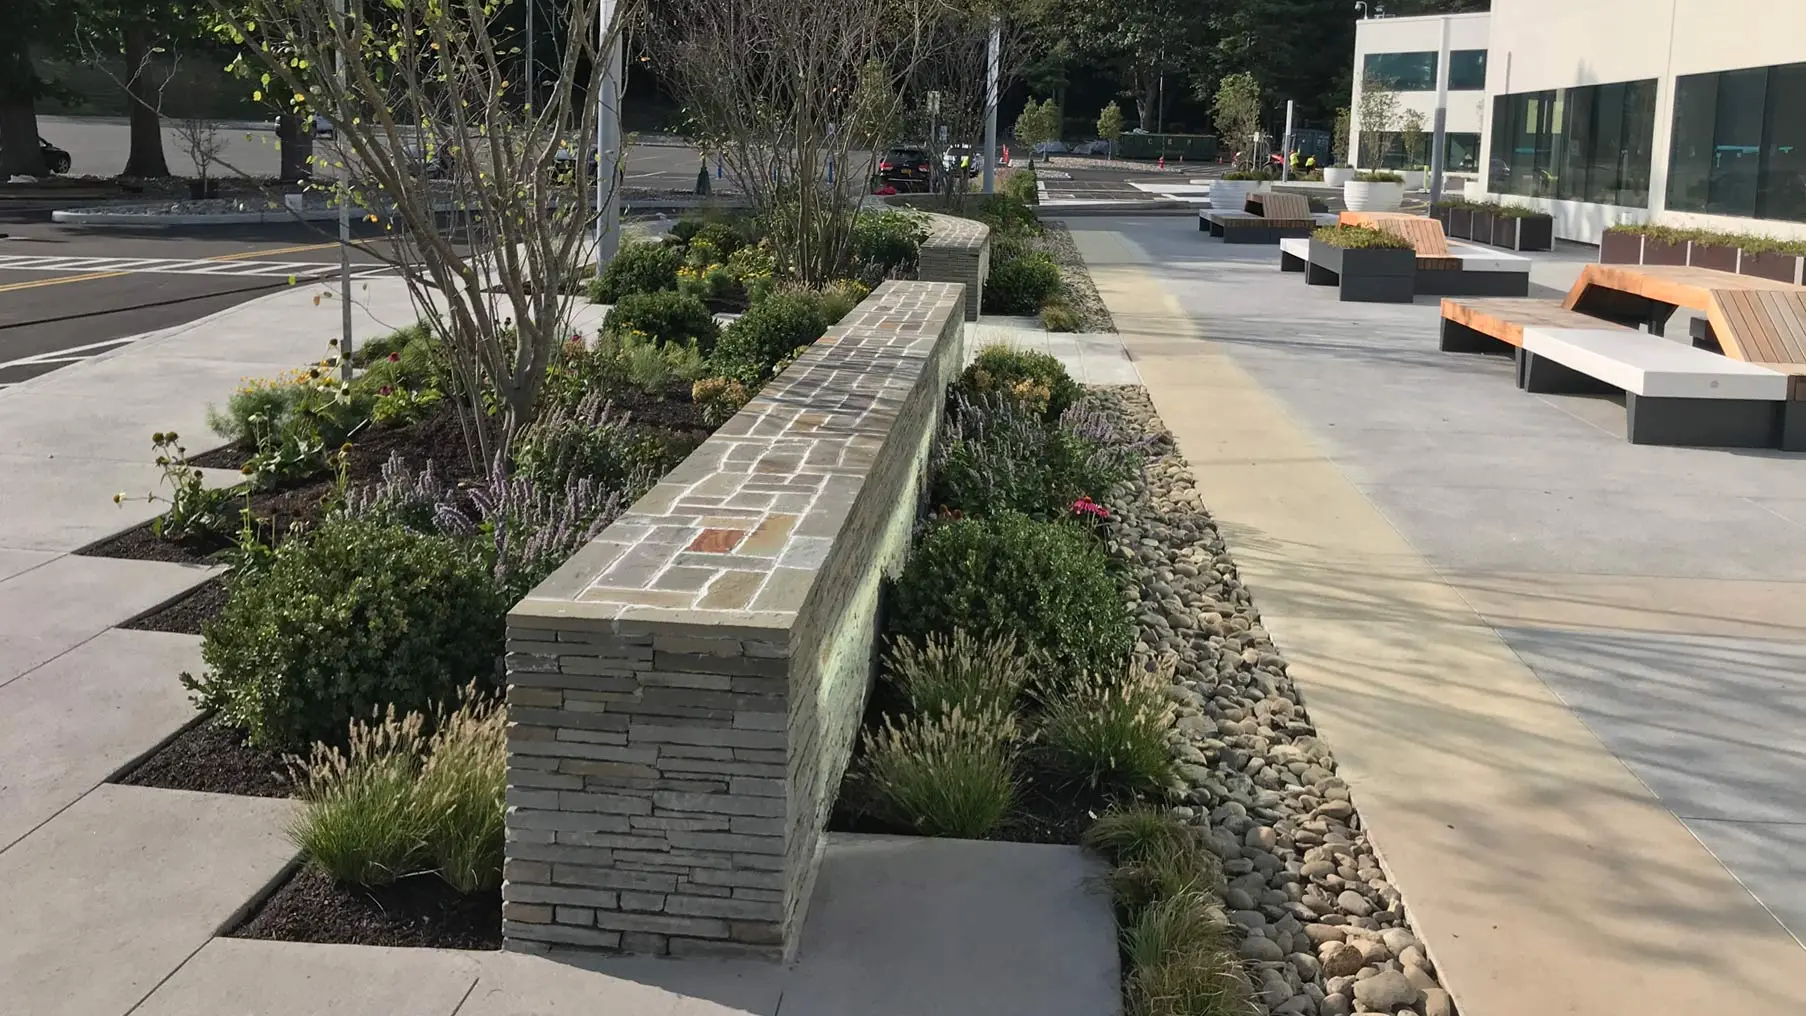 A commercial property's landscape maintained by professionals in Alpine, NJ.